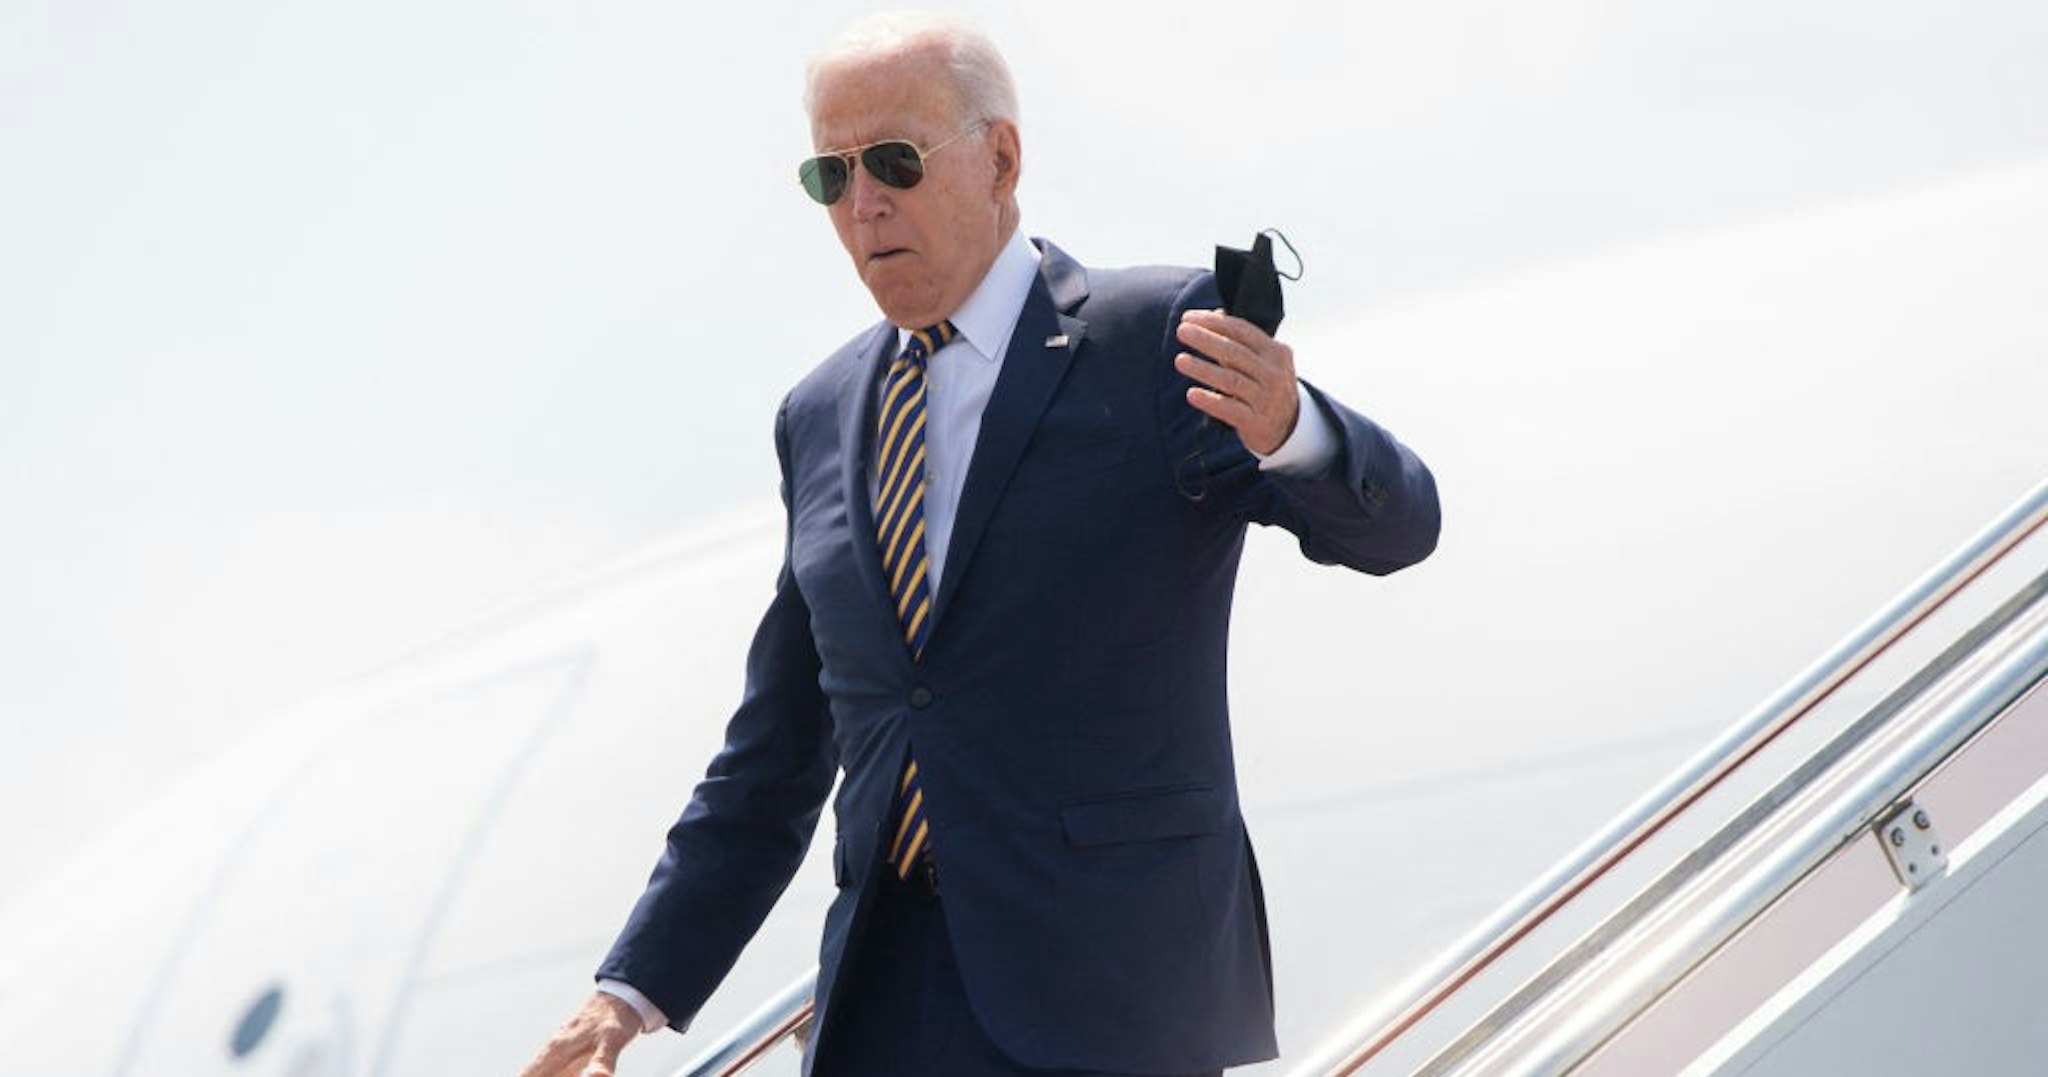 US President Joe Biden disembarks from Air Force One upon arrival at Lehigh Valley International Airport in Allentown, Pennsylvania, July 28, 2021, as he travels to speak on the economy. (Photo by SAUL LOEB / AFP) (Photo by